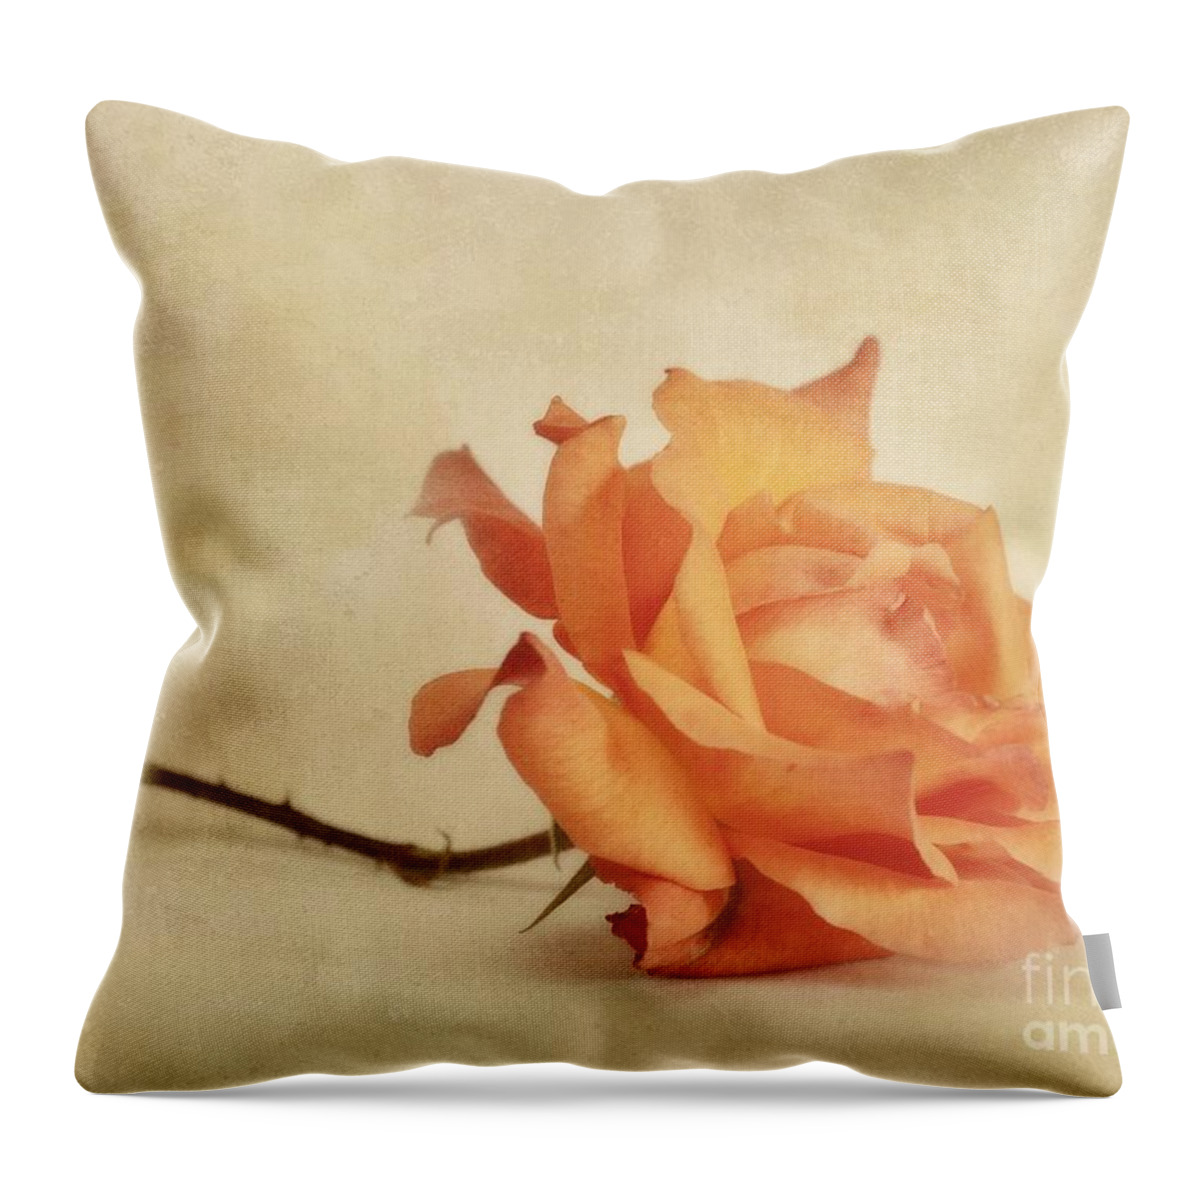 Rose Throw Pillow featuring the photograph Bellezza by Priska Wettstein